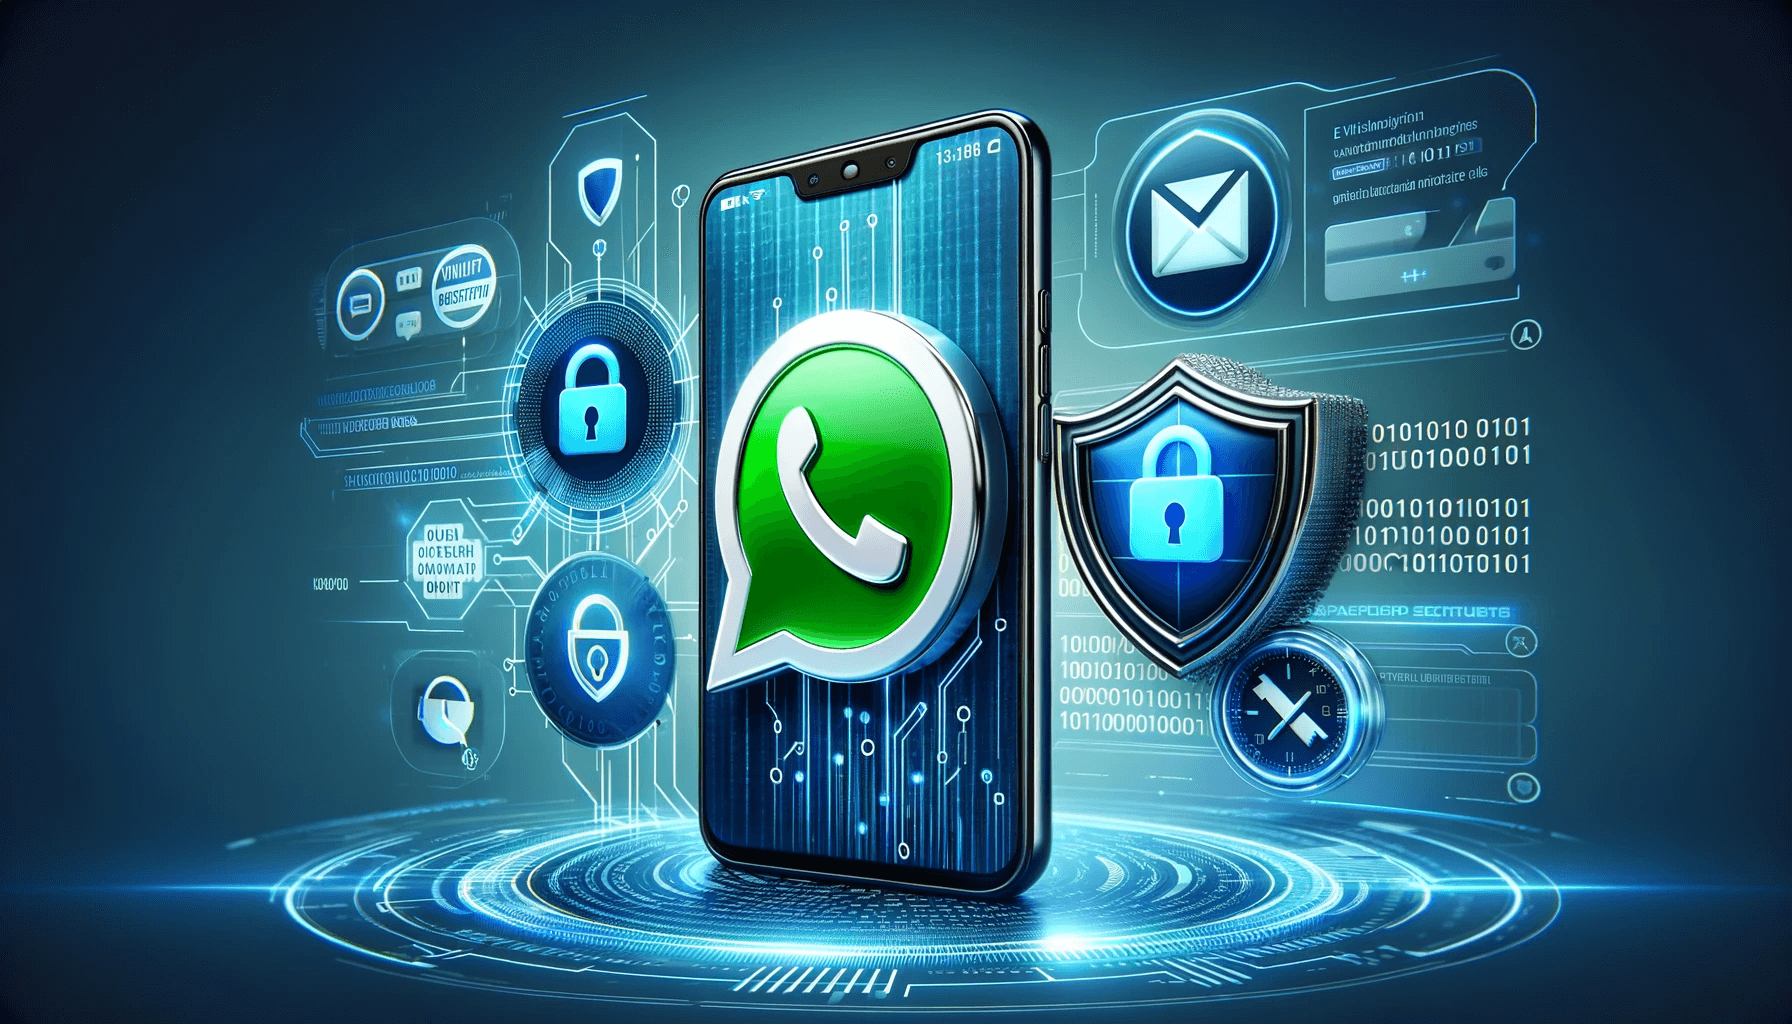 WhatsApp Security and privacy